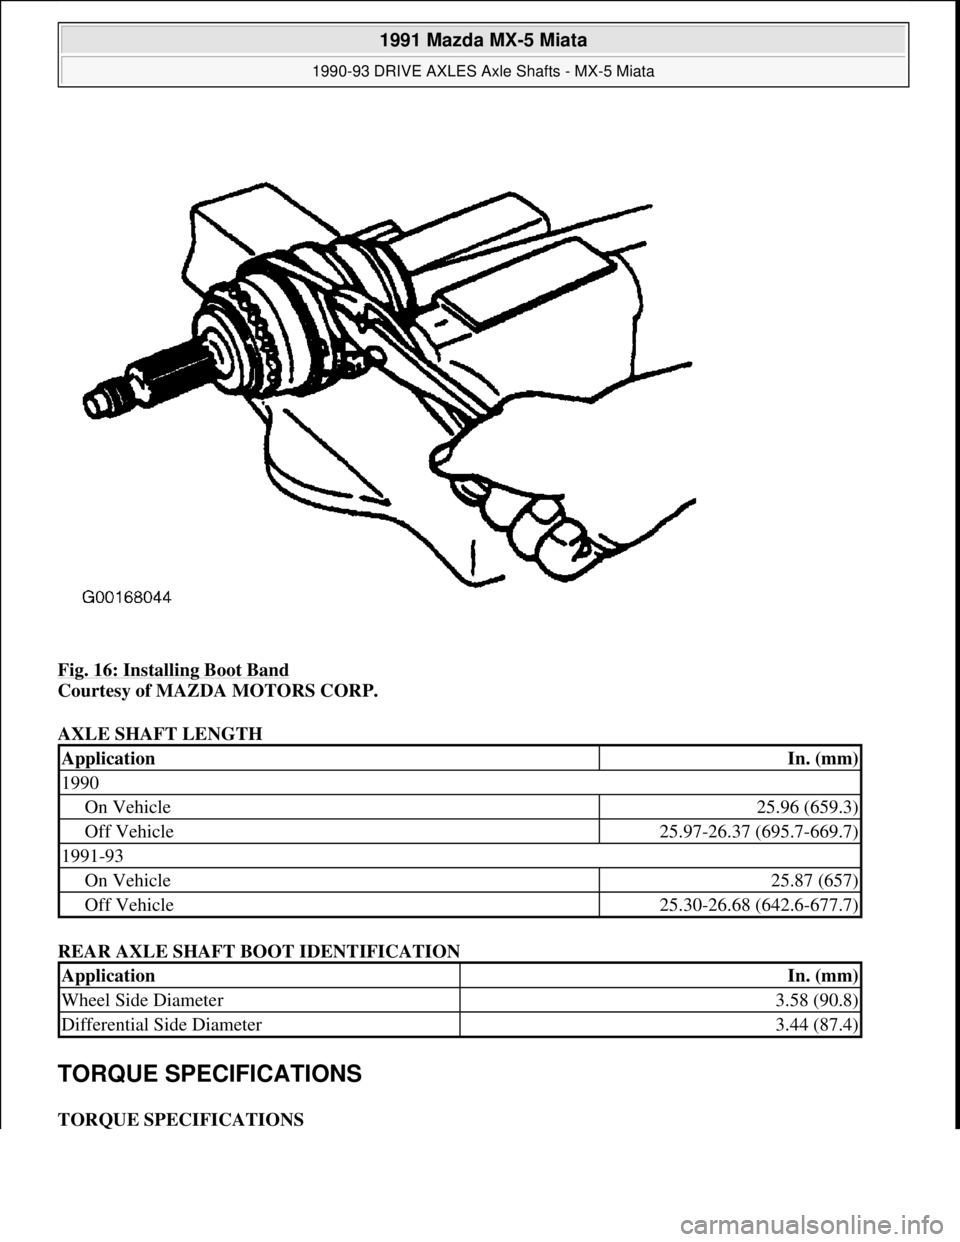 MAZDA MIATA 1991  Factory Service Manual Fig. 16: Installing Boot Band 
Courtesy of MAZDA MOTORS CORP. 
AXLE SHAFT LENGTH 
REAR AXLE SHAFT BOOT IDENTIFICATION 
TORQUE SPECIFICATIONS 
TORQUE SPECIFICATIONS 
ApplicationIn. (mm)
1990
On Vehicle